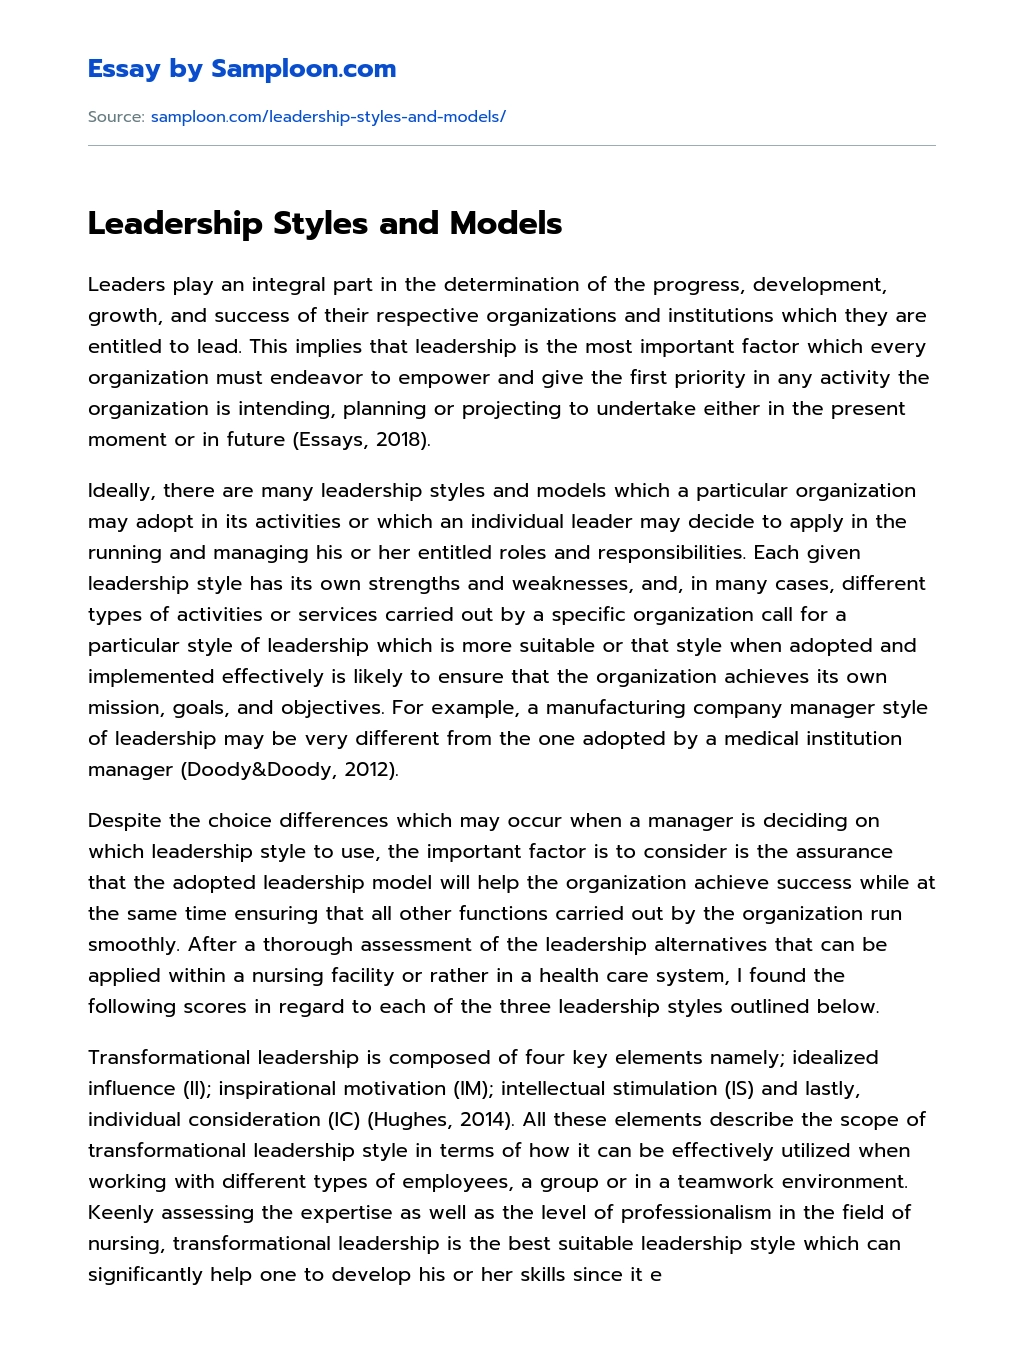 Leadership Styles and Models essay